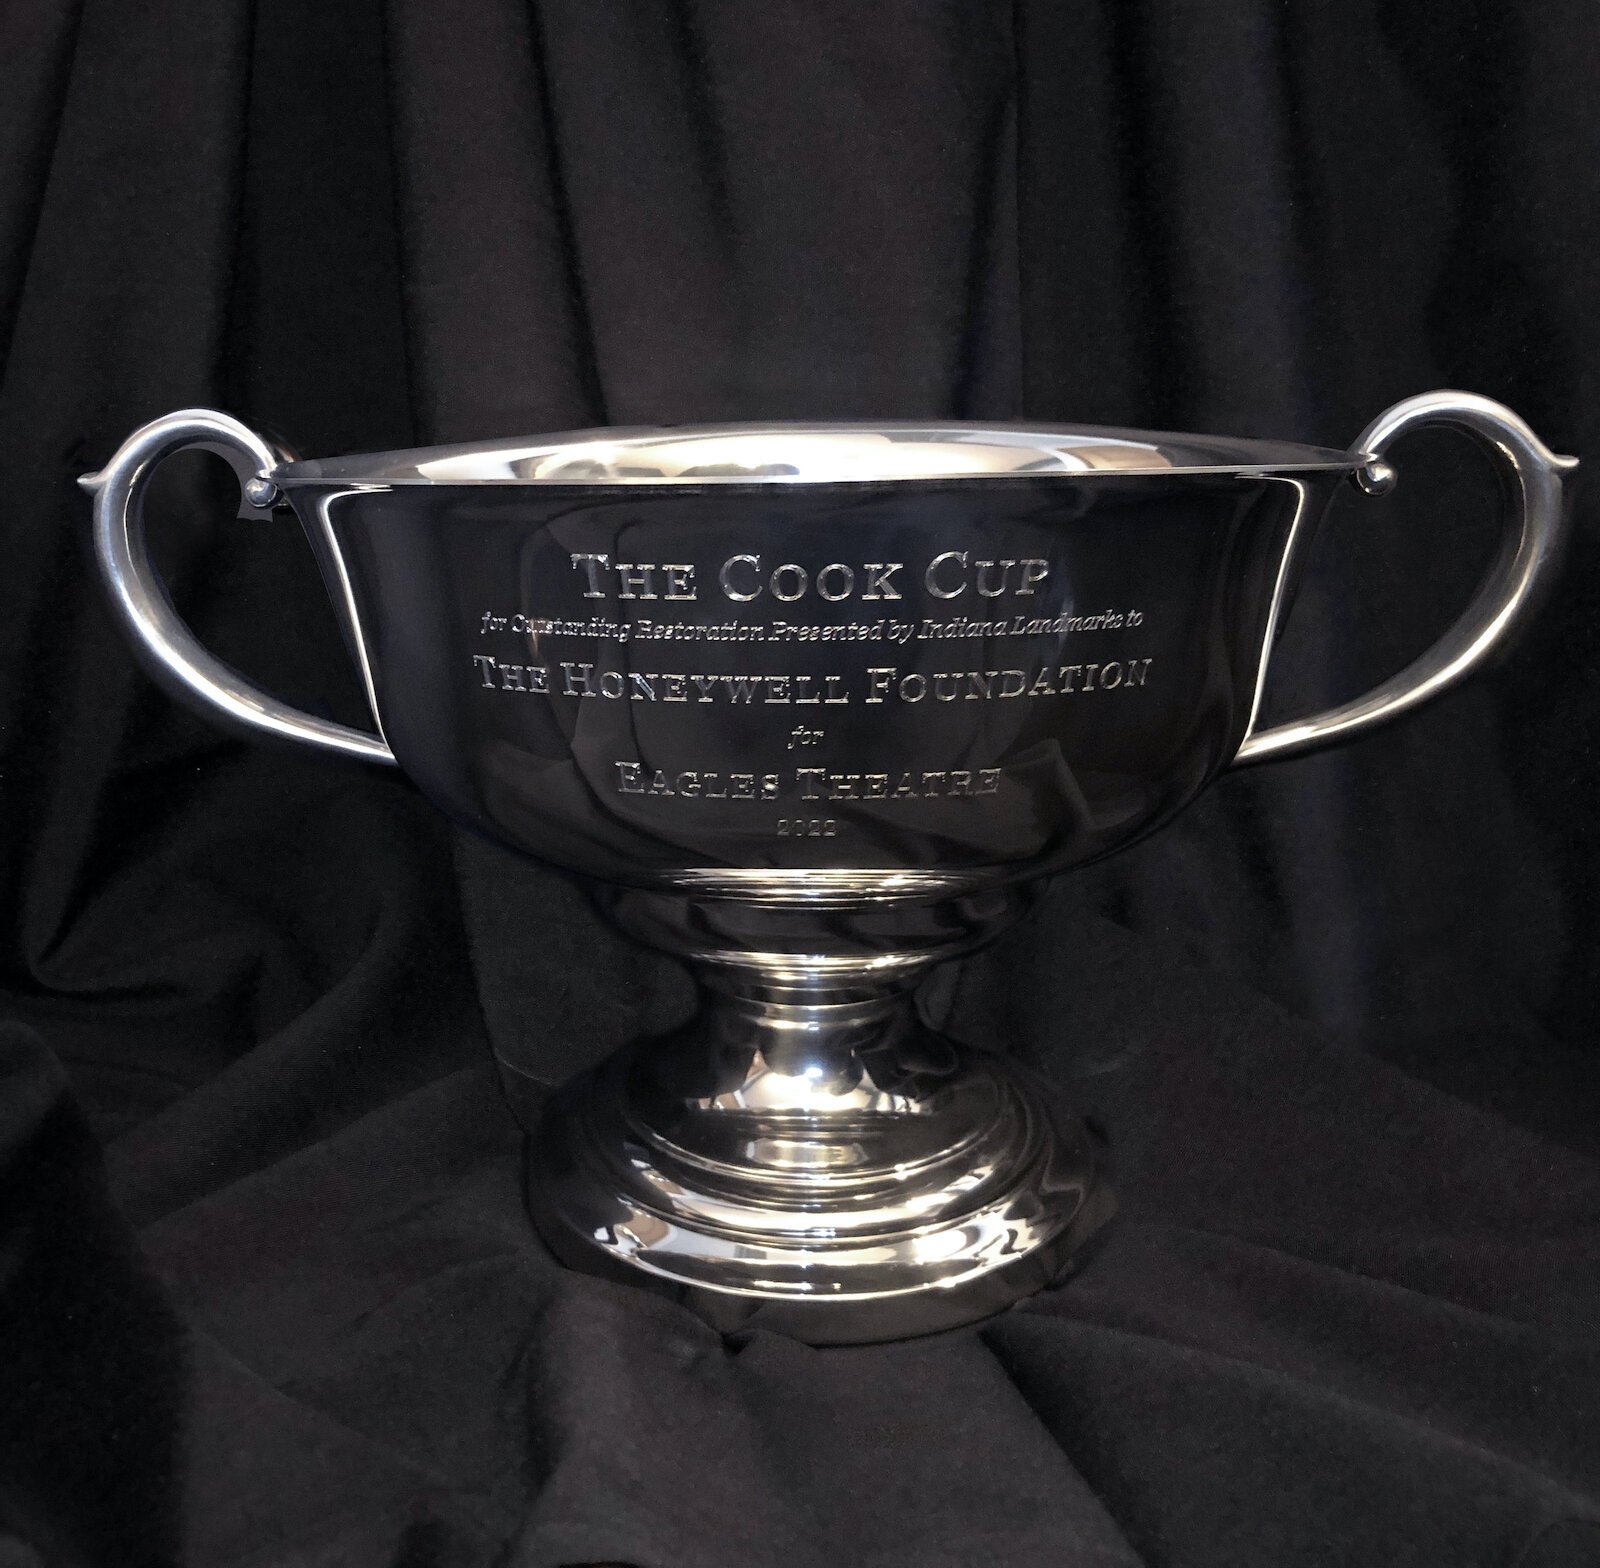 The Cook Cup Award